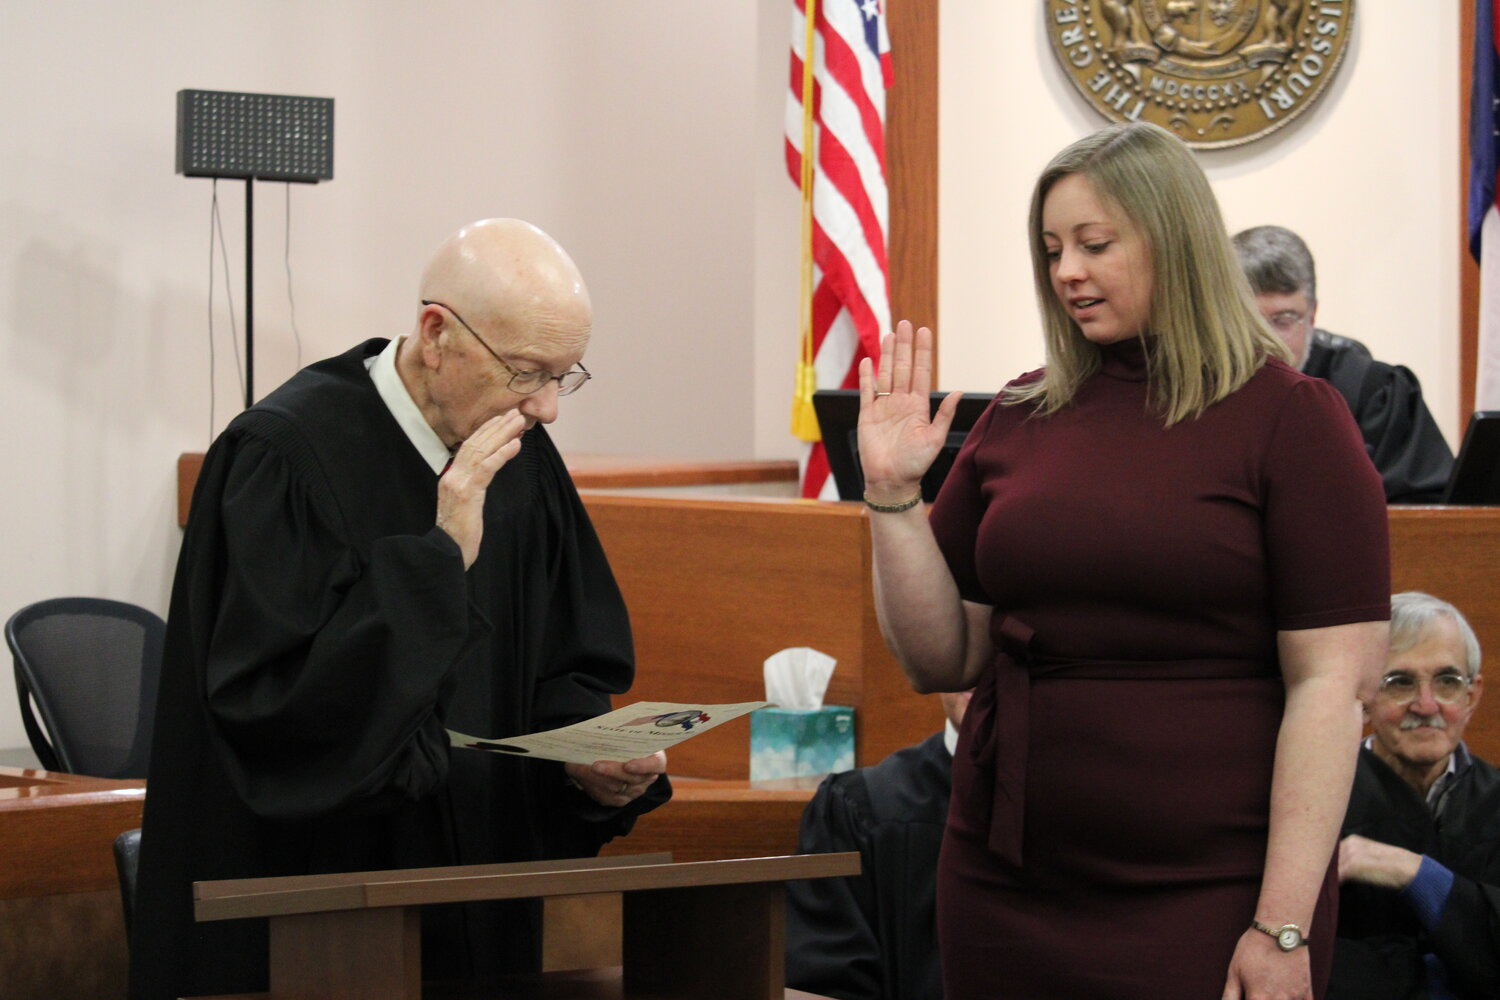 Katie Joyce, right, takes her oath of office as she is installed as a judge by senior Judge Keith Sutherland during a ceremony Dec. 4 at the Warren County Courthouse.